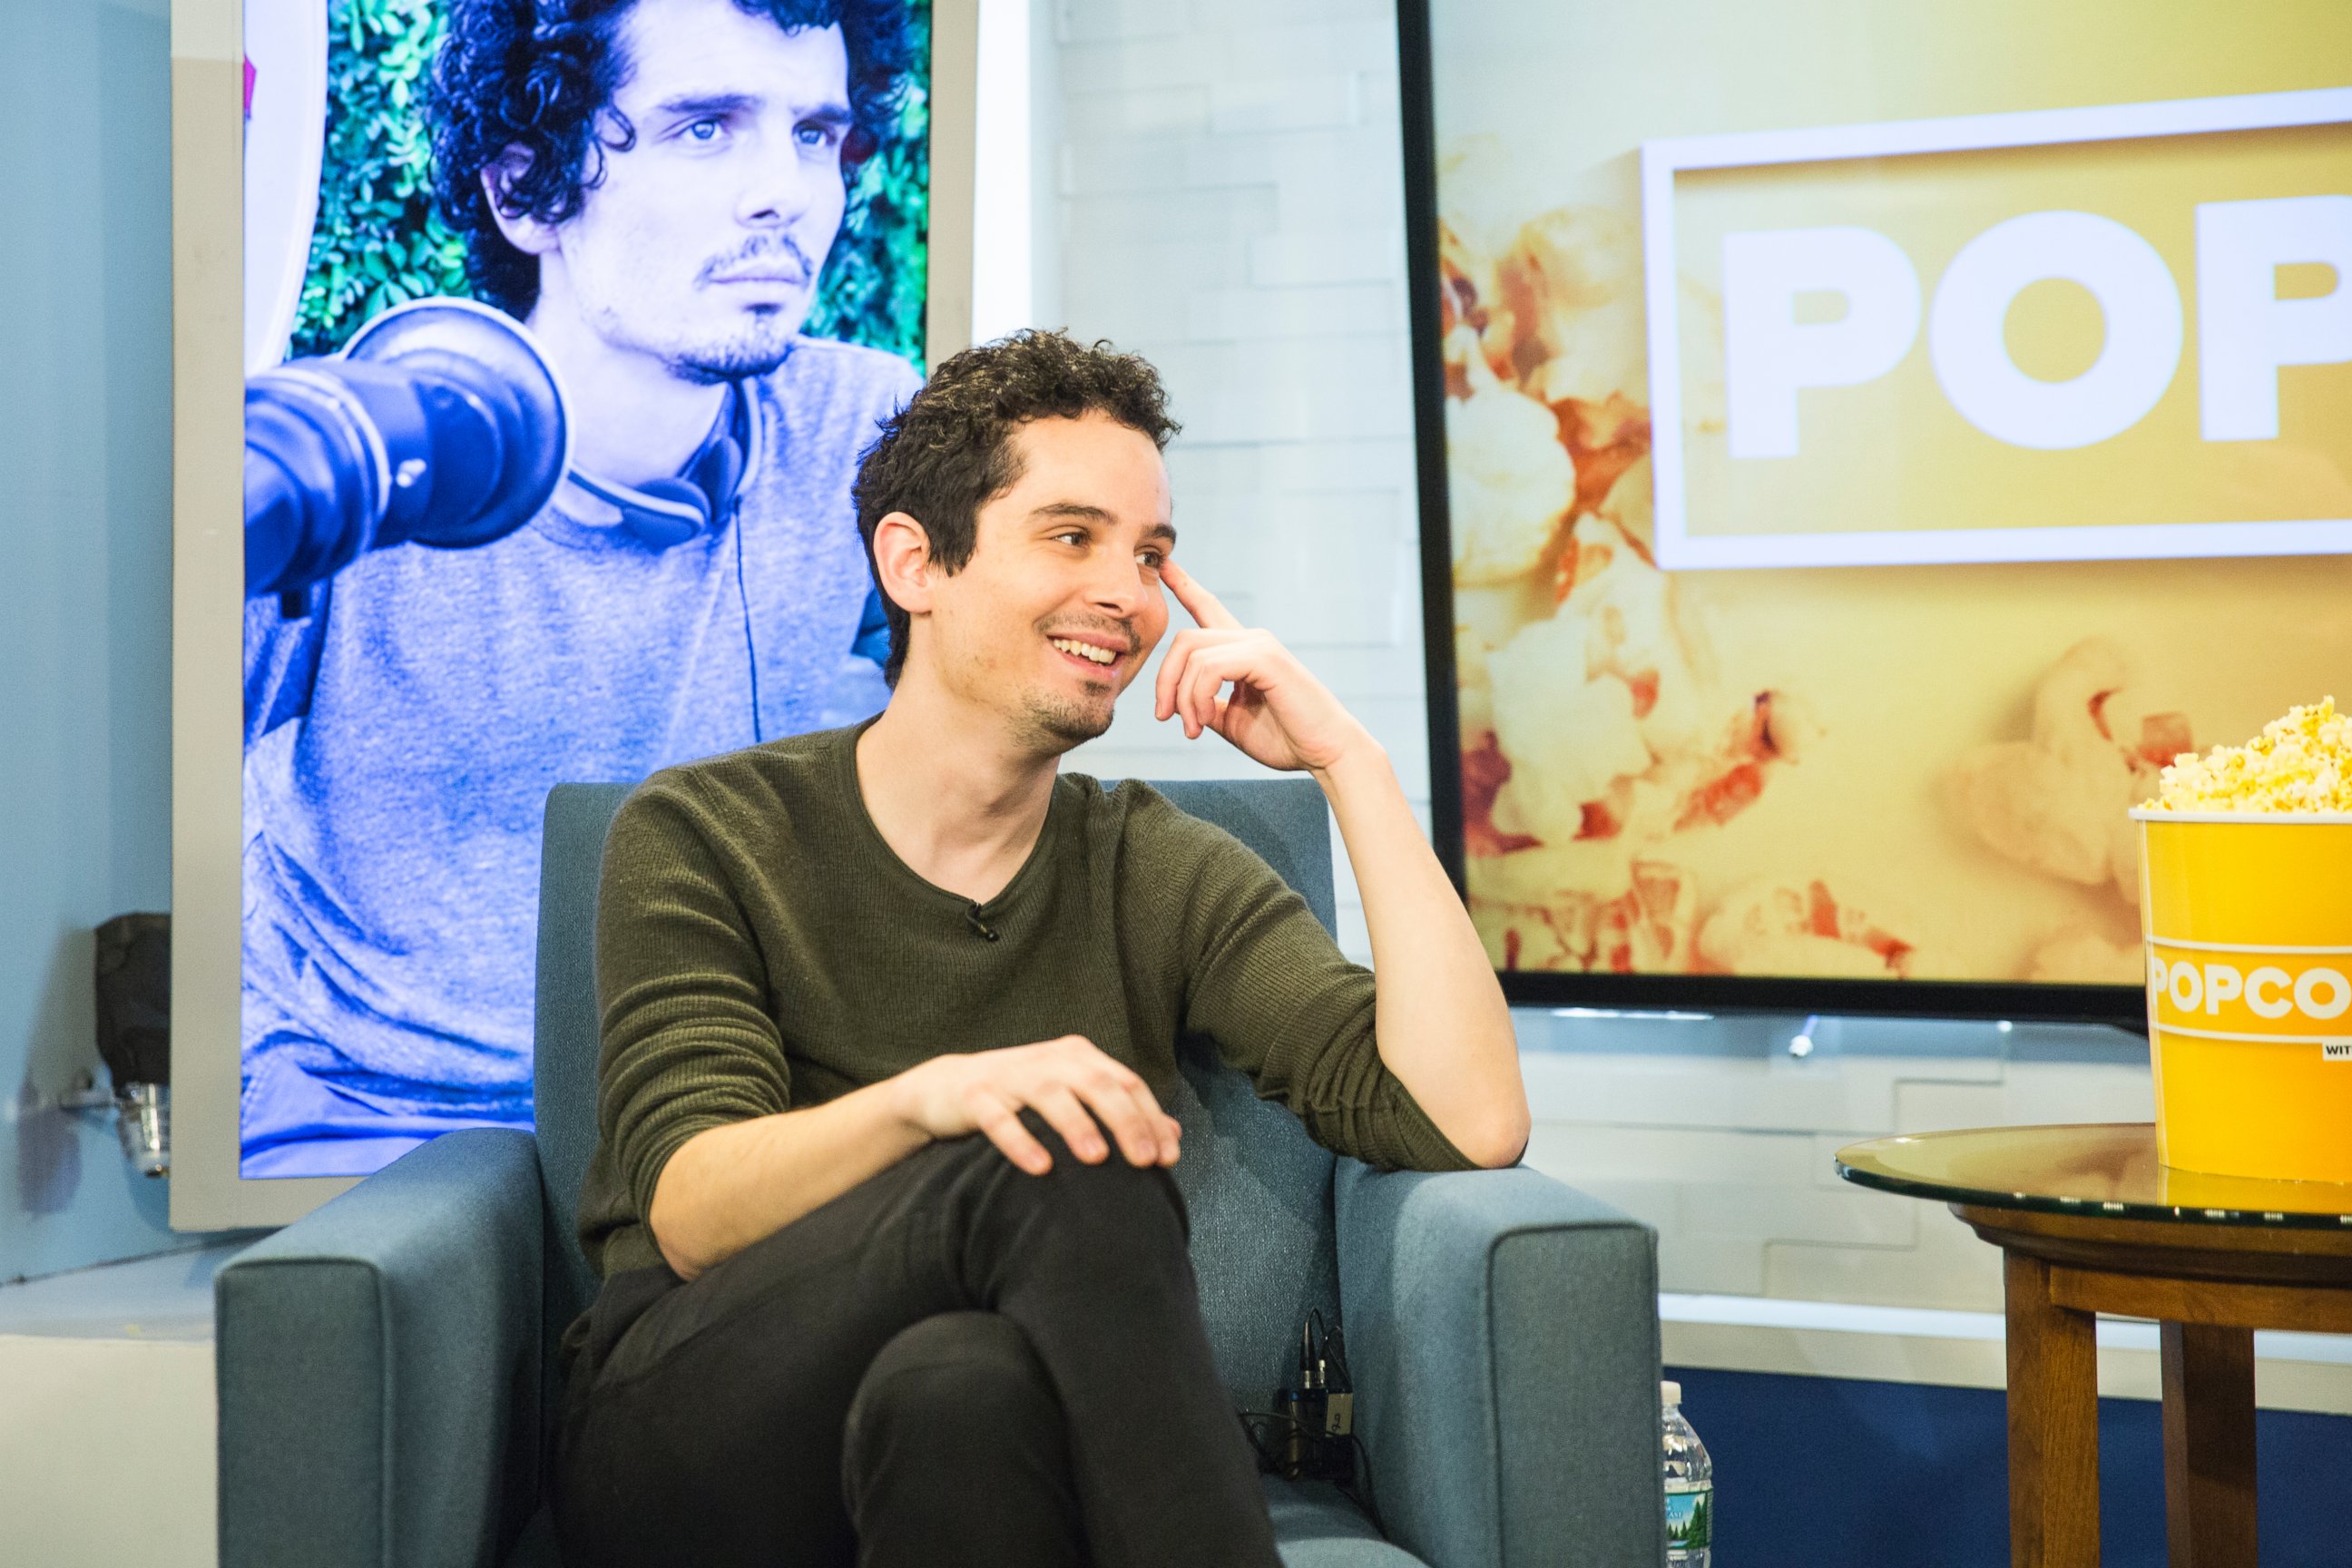 PHOTO: Damien Chazelle is seen here at the ABC Studios in New York, Nov. 28, 2016